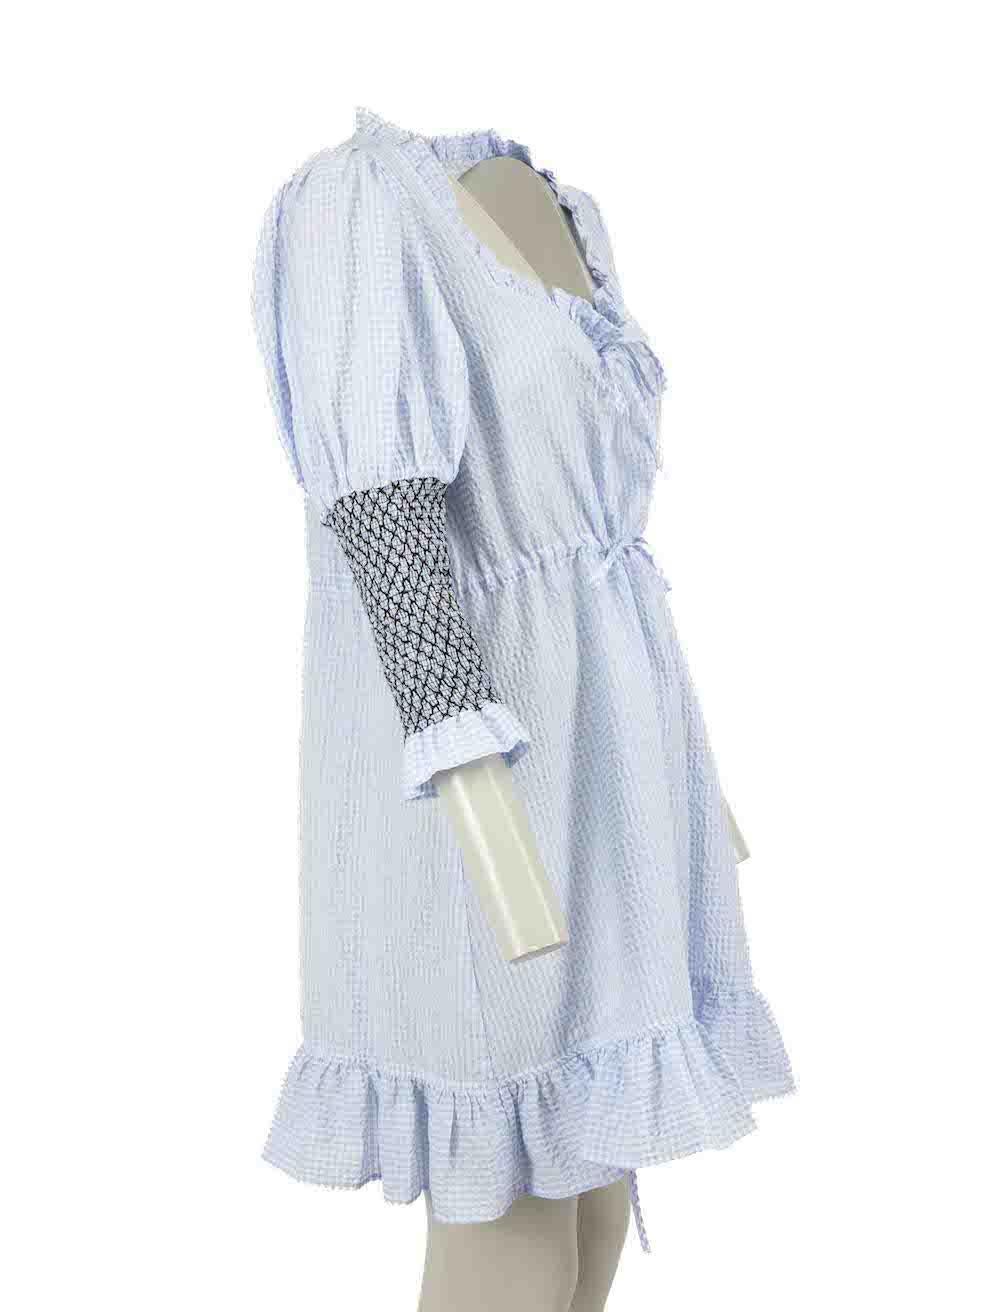 CONDITION is Never worn, with tags. No visible wear to dress is evident despite one or two small, superficial plucks to embroidery thread at the sleeve as a result of storage on this new Ganni designer resale item.
 
 Details
 Charron
 Blue
 Cotton
